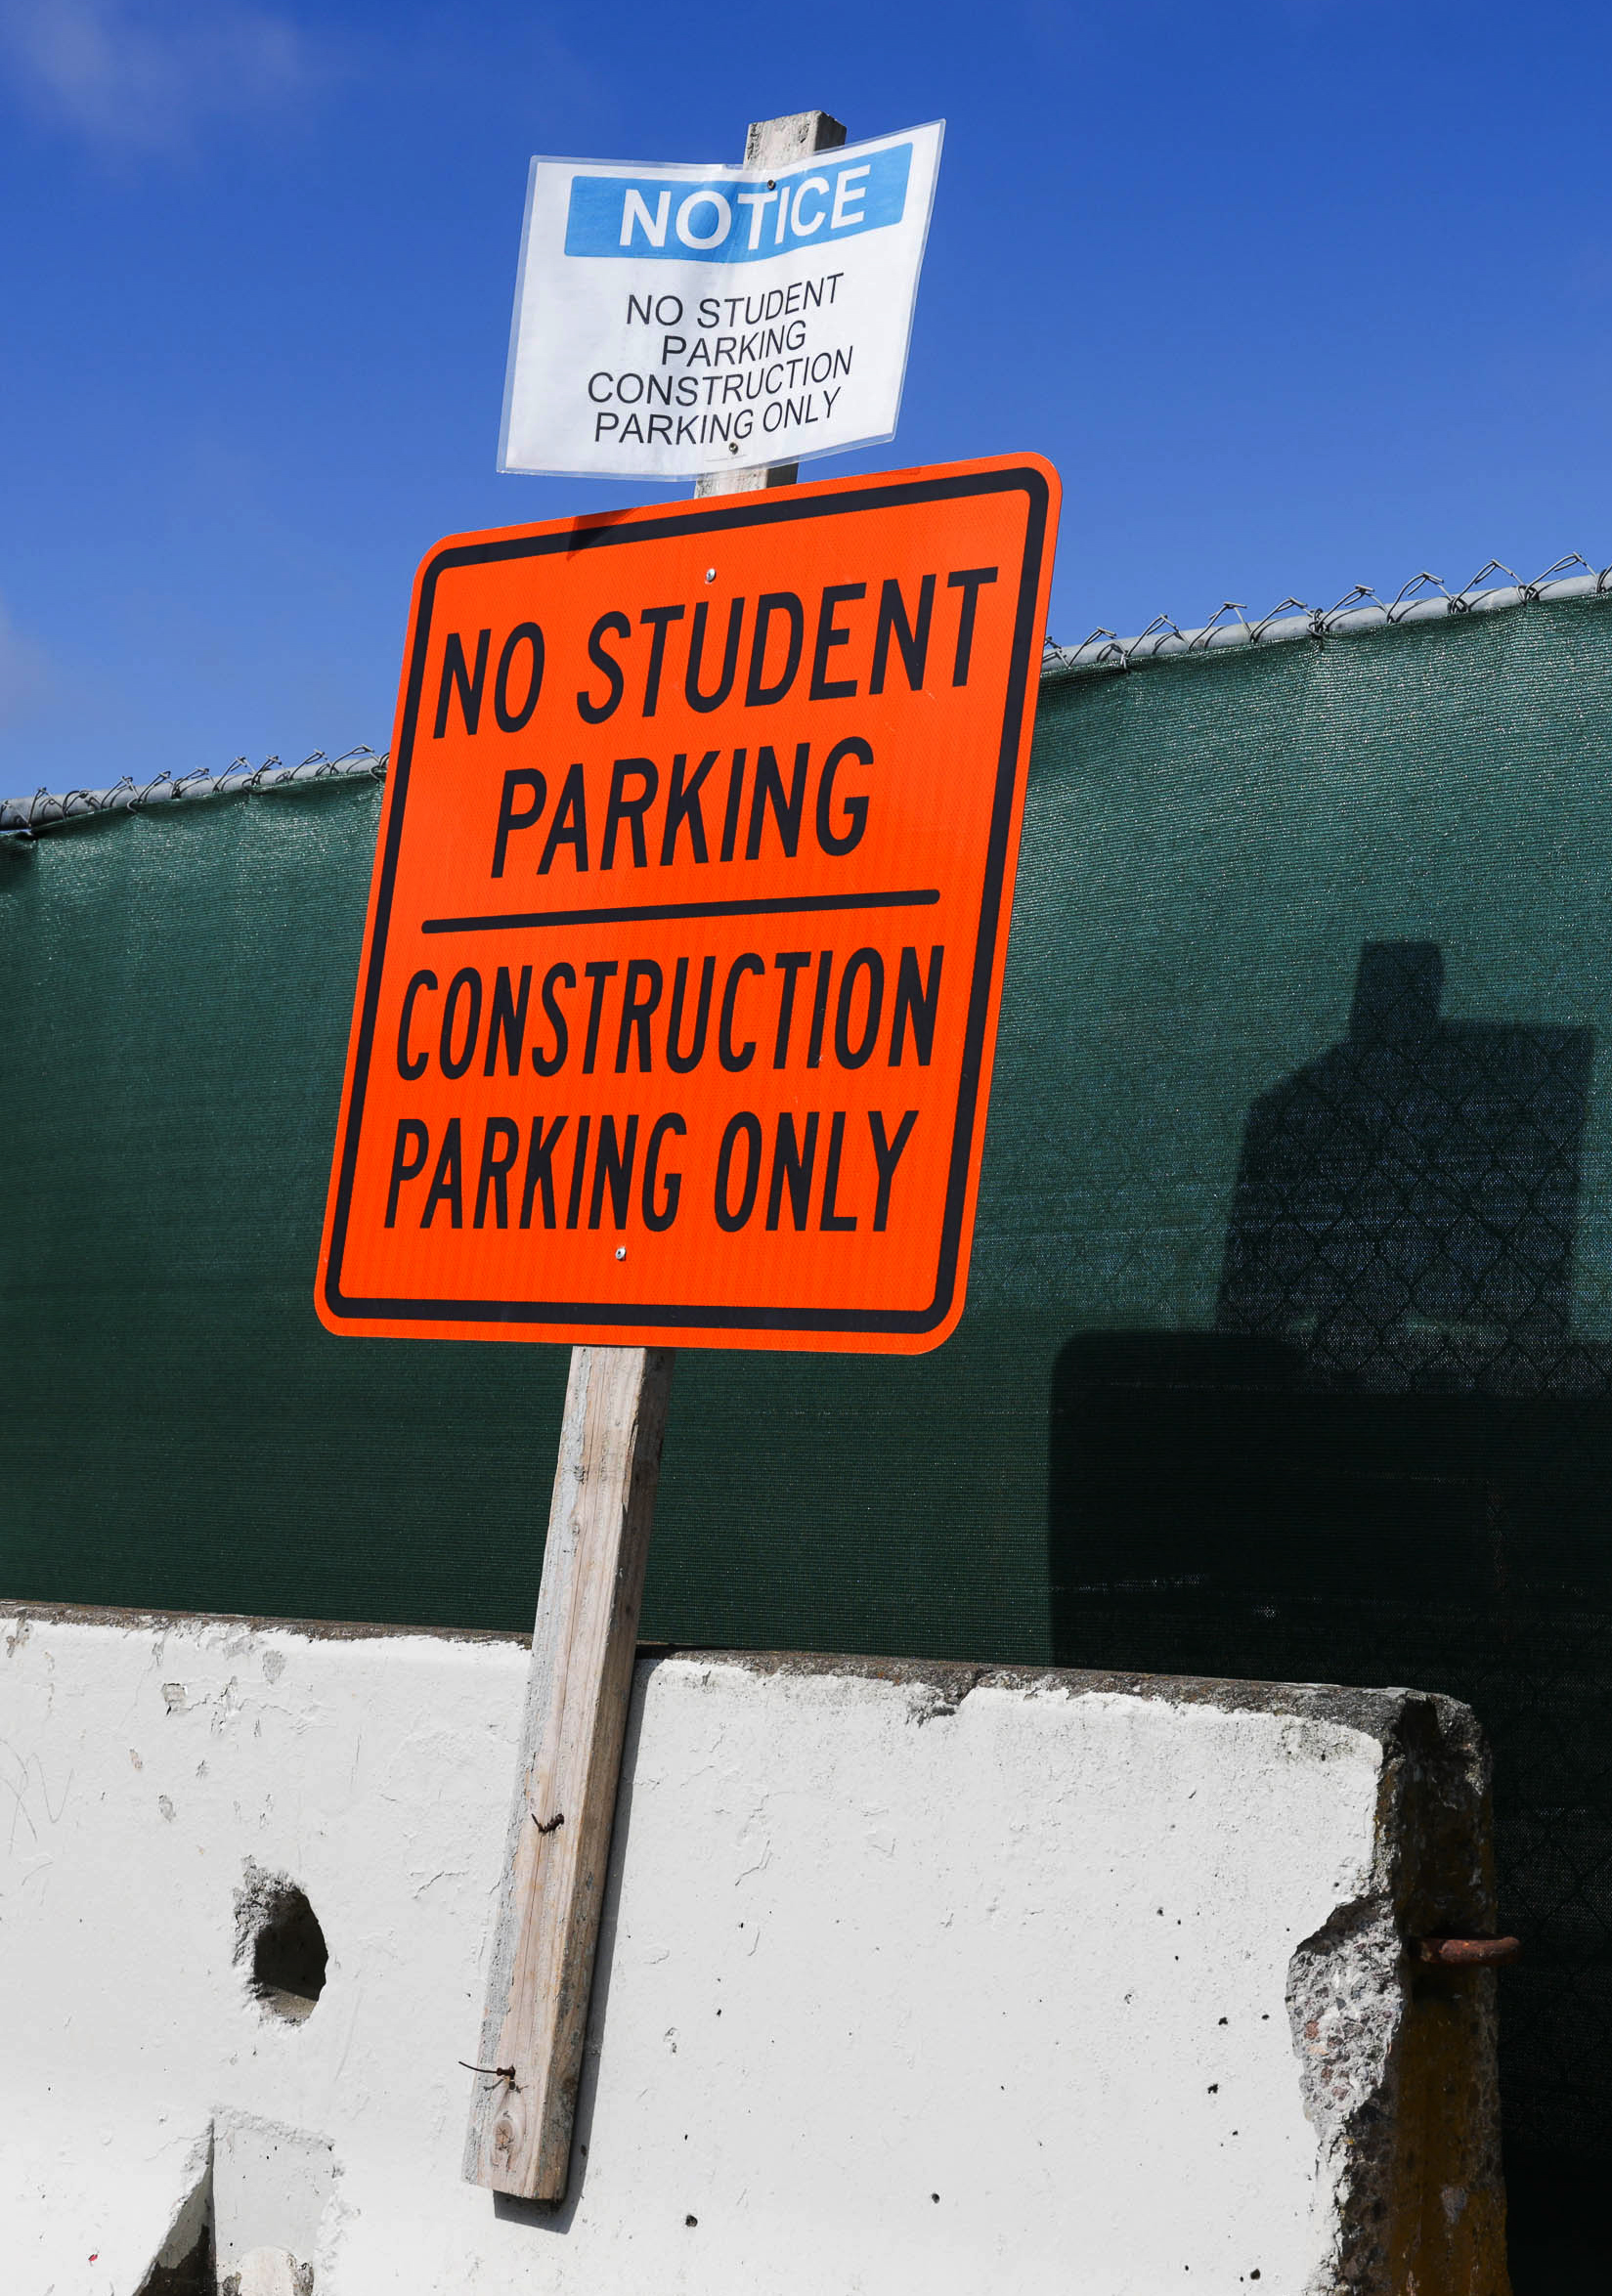 Two signs on a post read &quot;NO STUDENT PARKING, CONSTRUCTION PARKING ONLY&quot;; one sign is orange, the other is white.